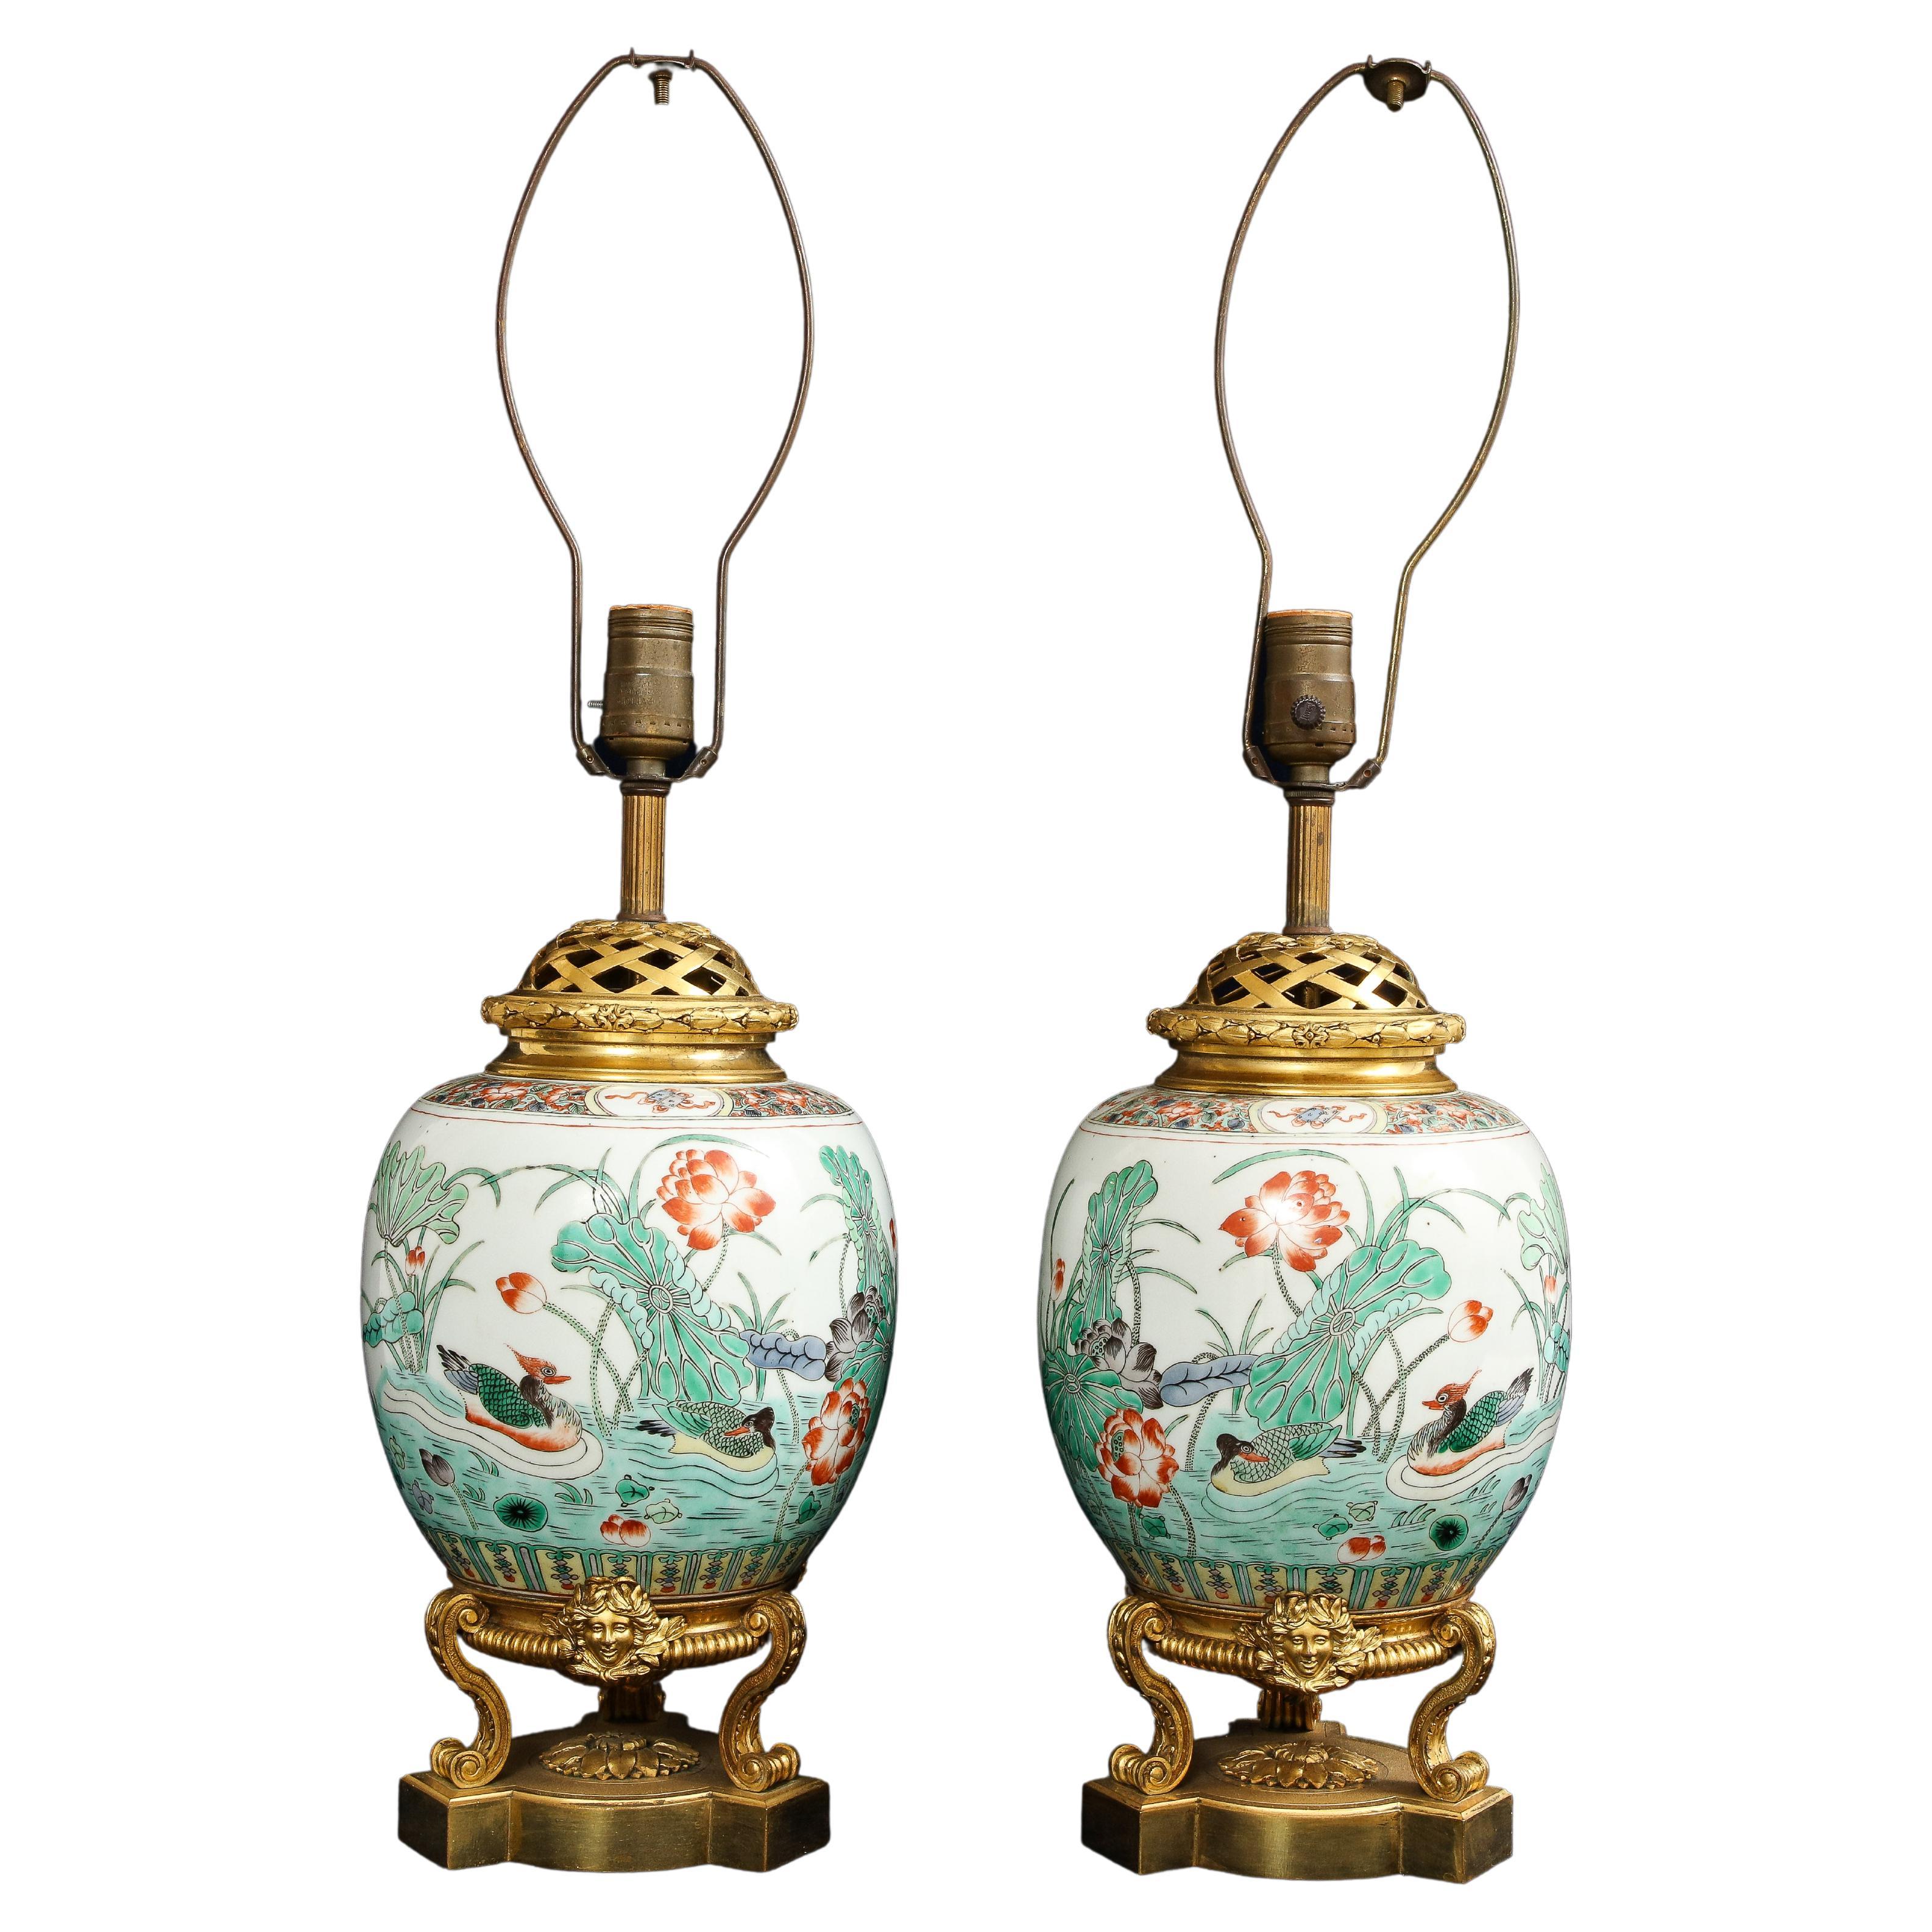 Pair 19th C Ormolu Mounted Chinese Famille Verte Porcelain Vases Turned to Lamps For Sale